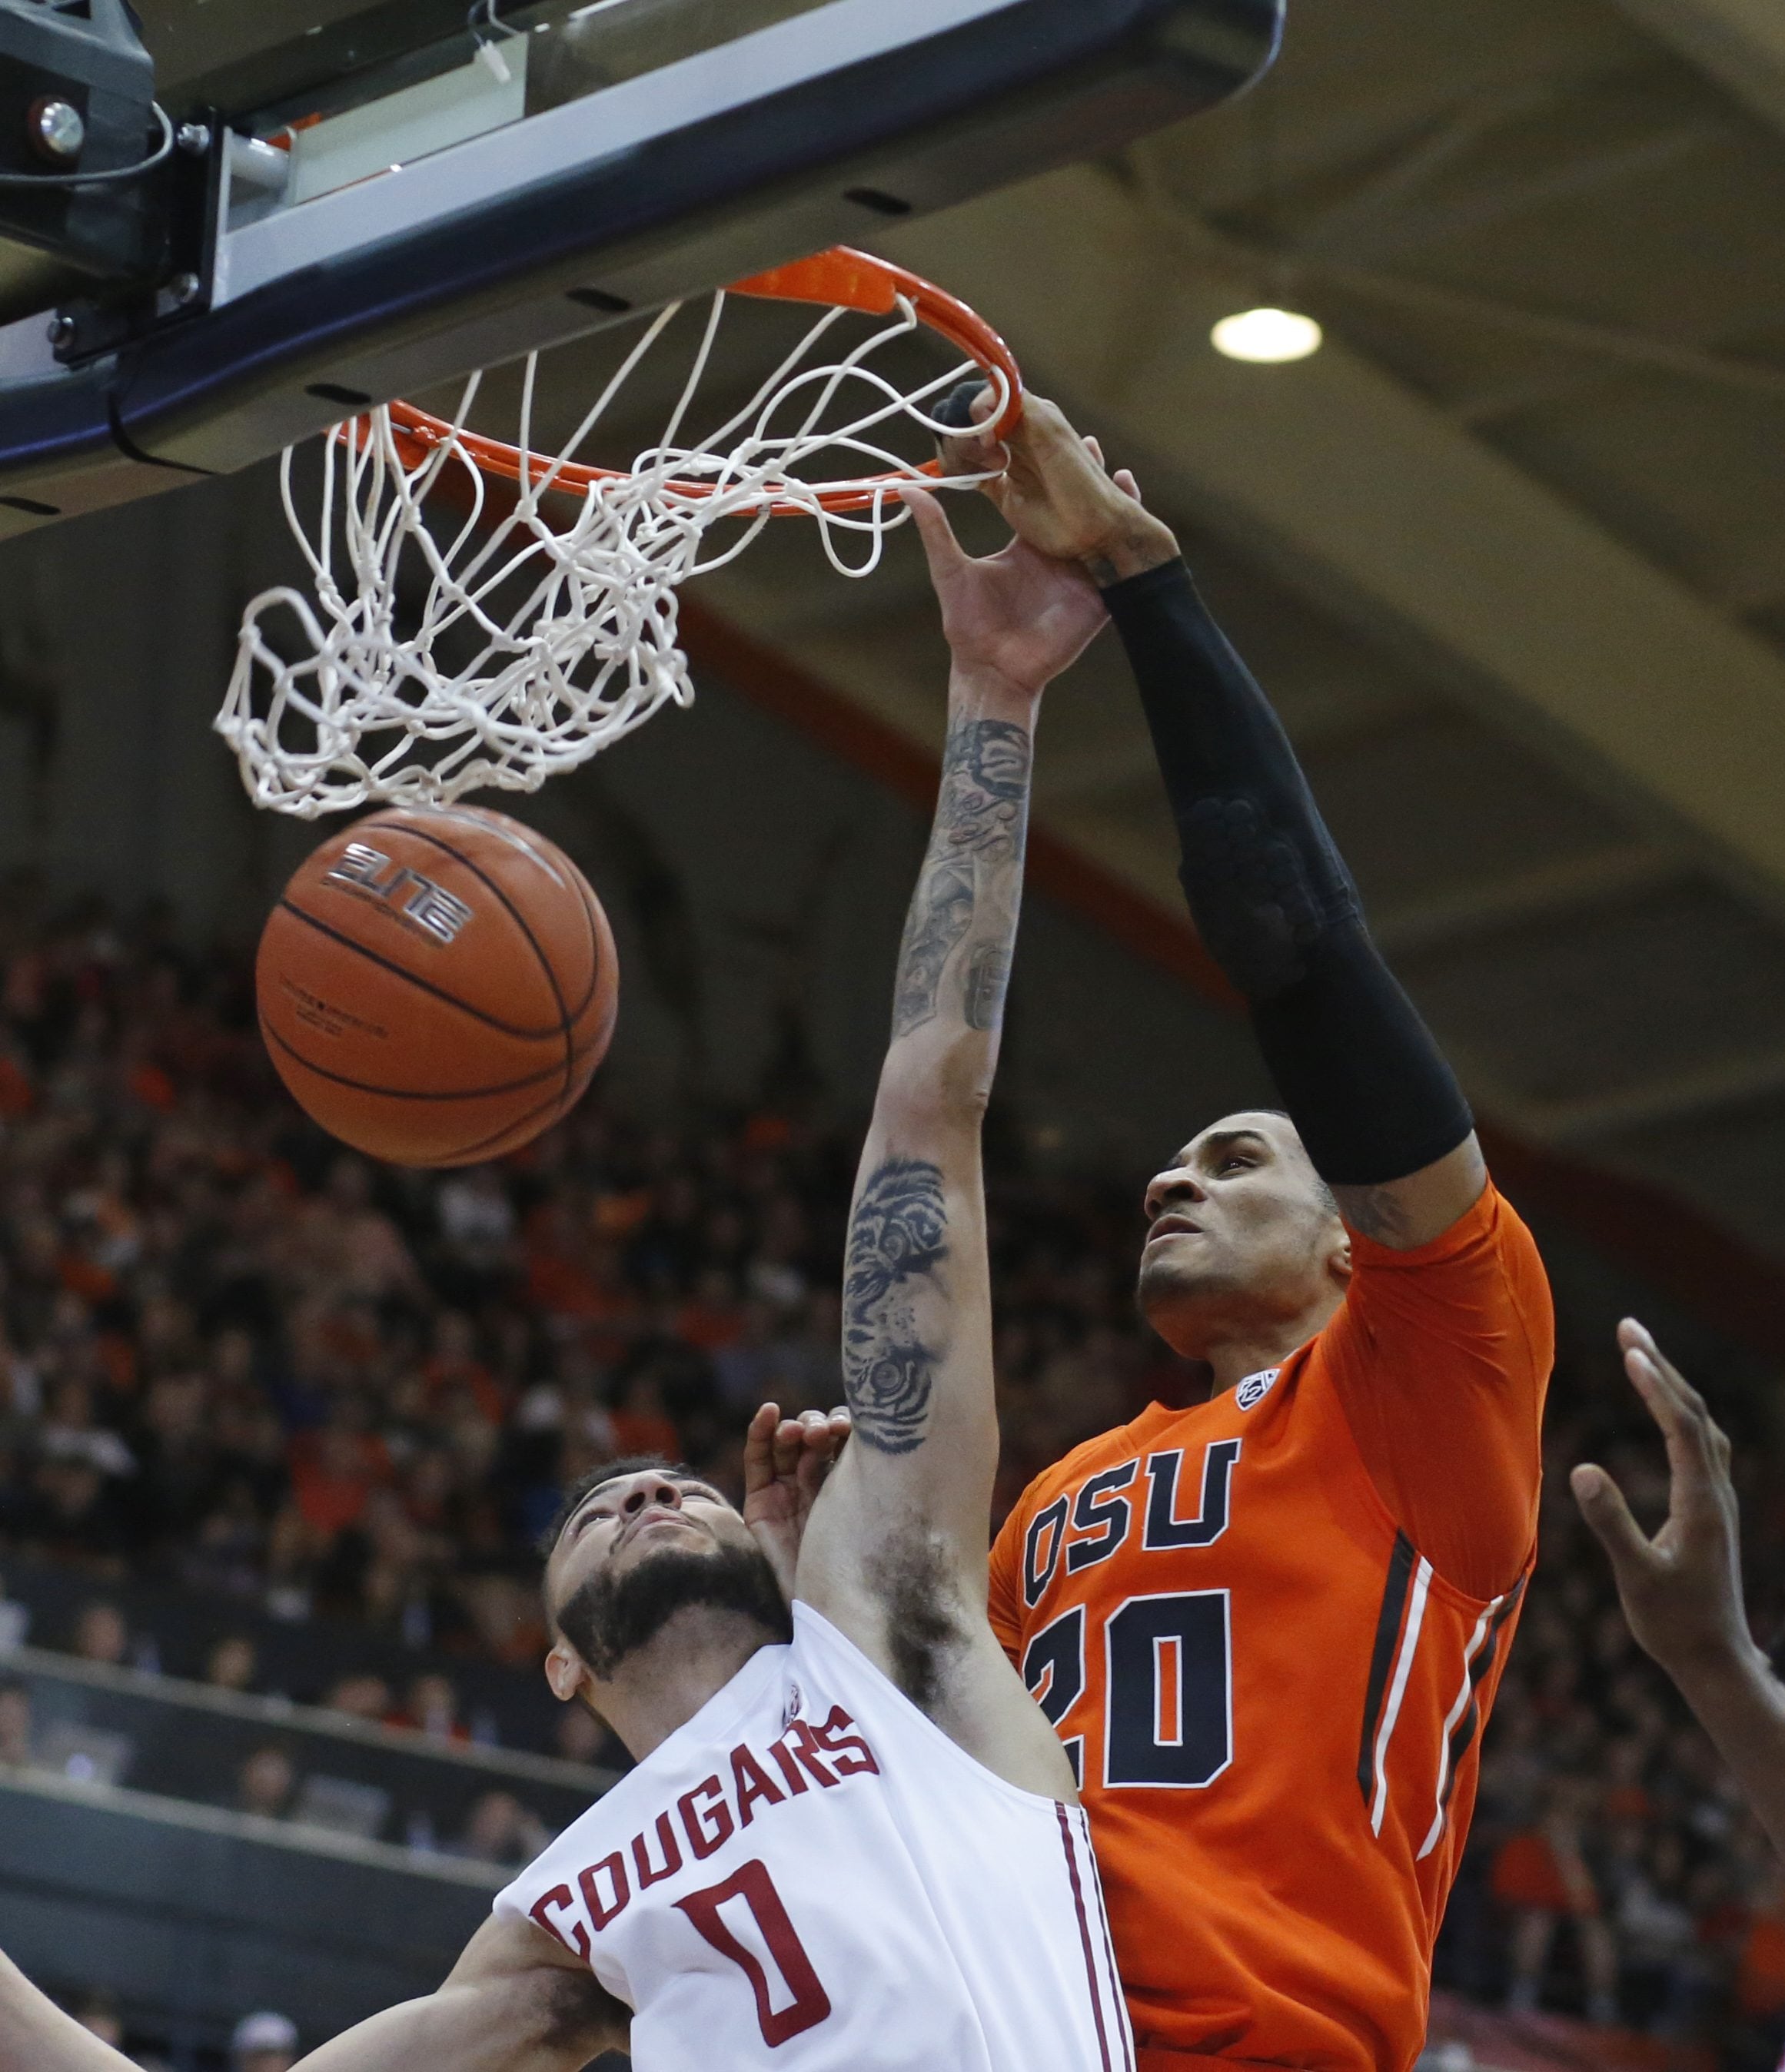 Oregon State's Gary Payton II, right, dunks over Washington State's Derrien King in the first half of an NCAA college basketball game in Corvallis, Ore., on Sunday, Feb. 28, 2016. (AP Photo/Timothy J.